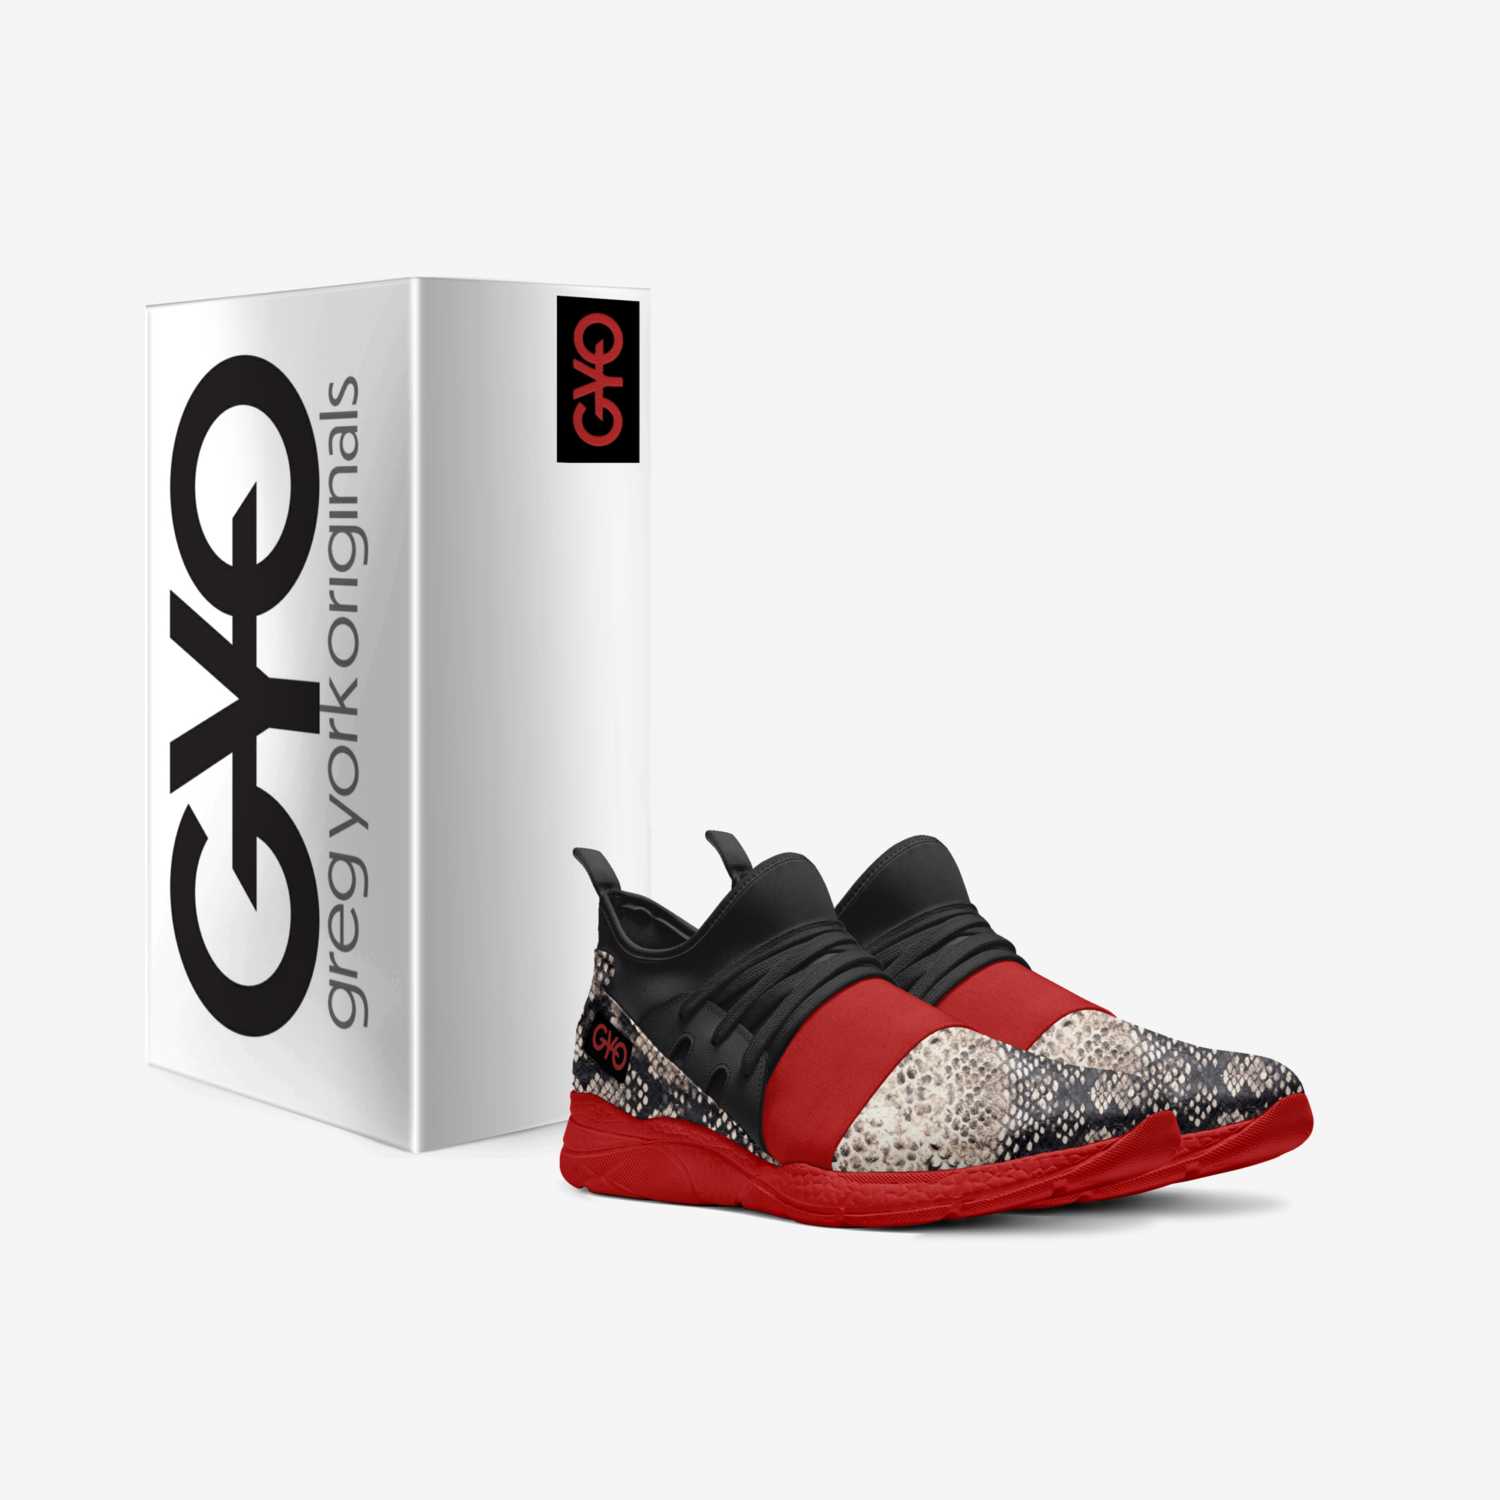 C0DE RED custom made in Italy shoes by Greg York | Box view